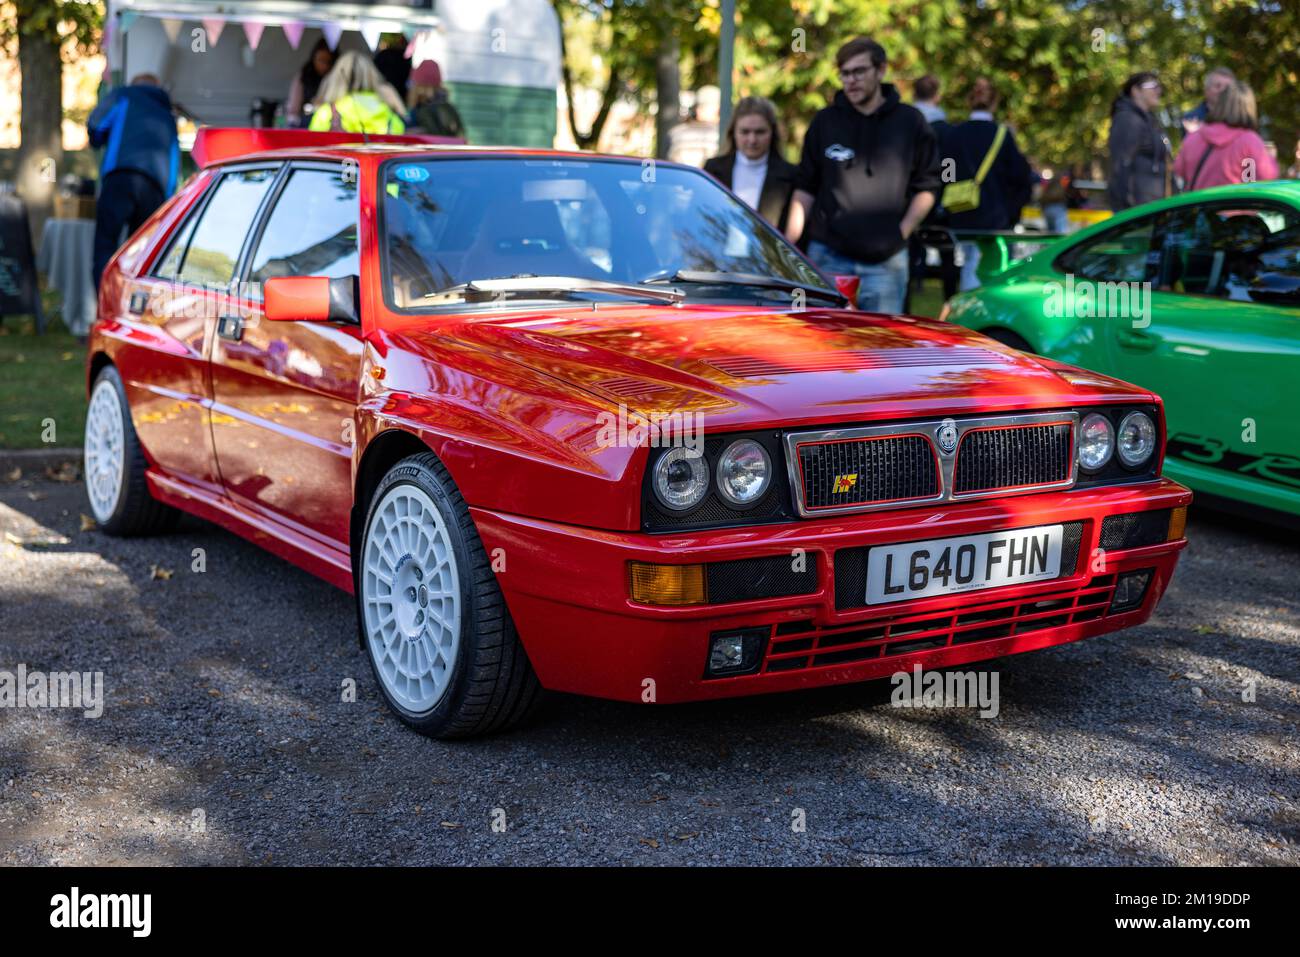 1993 Lancia Delta HF integrale ‘L640 FHN’  on display at the October Scramble held at the Bicester Heritage Centre on the 9th October 2022 Stock Photo